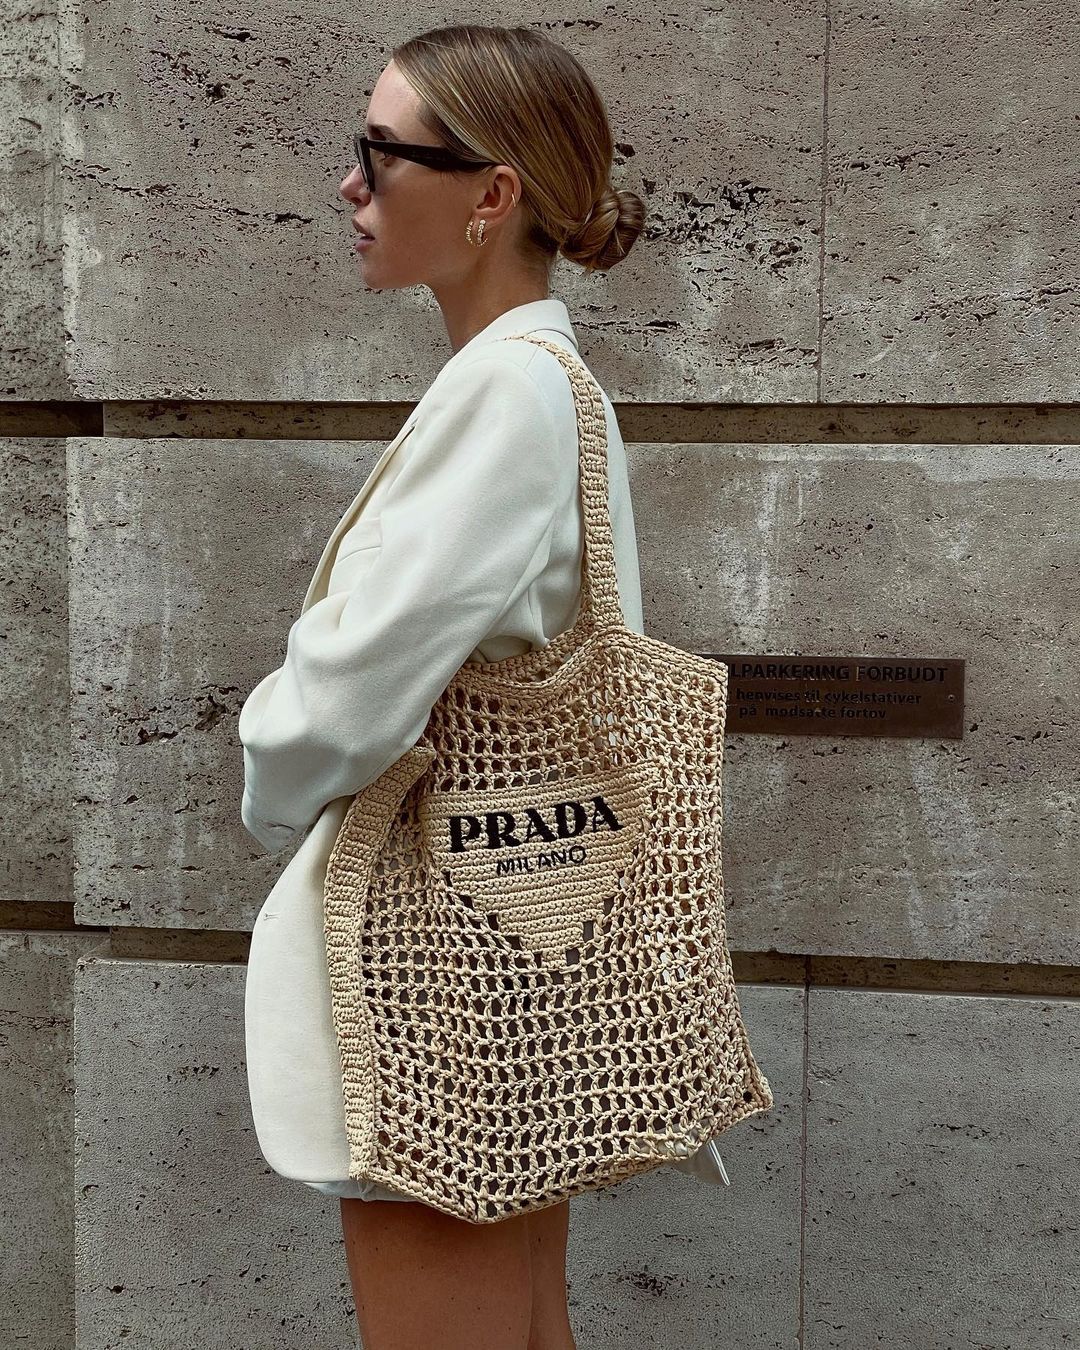 Prada Tote Size and Style Guide